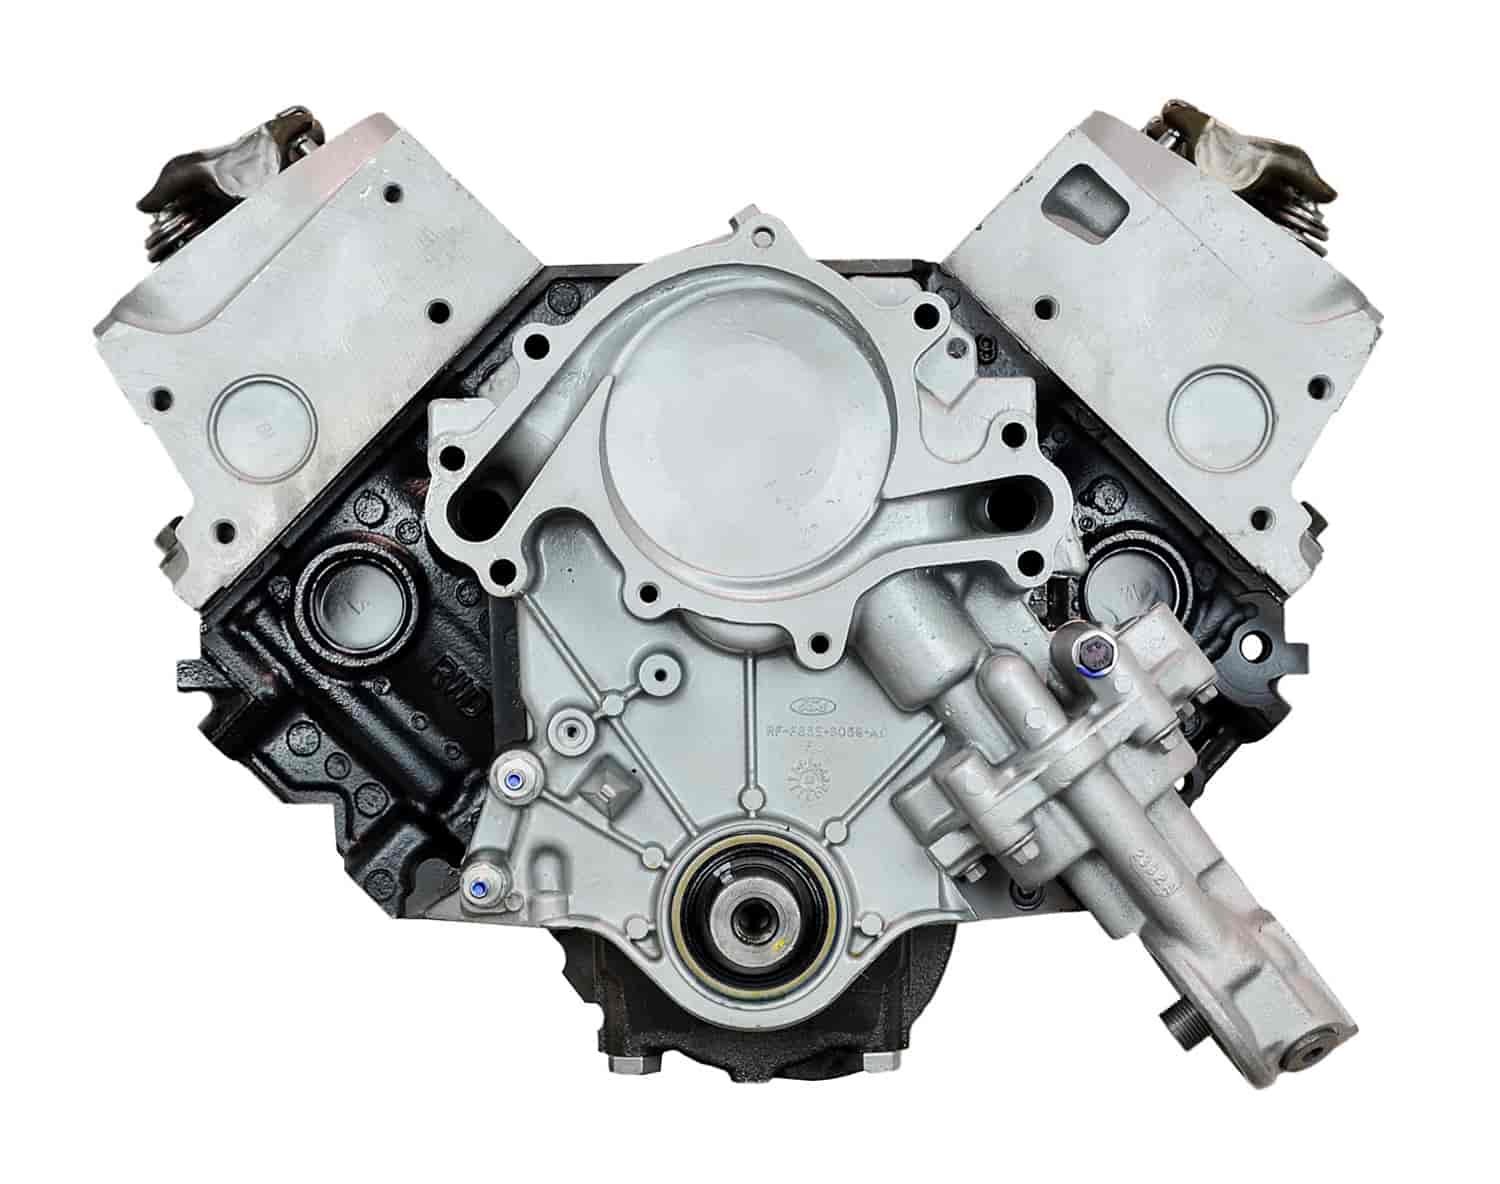 Remanufactured Crate Engine for 1996-1998 Ford Mustang, Thunderbird & Mercury Cougar with 3.8L V6